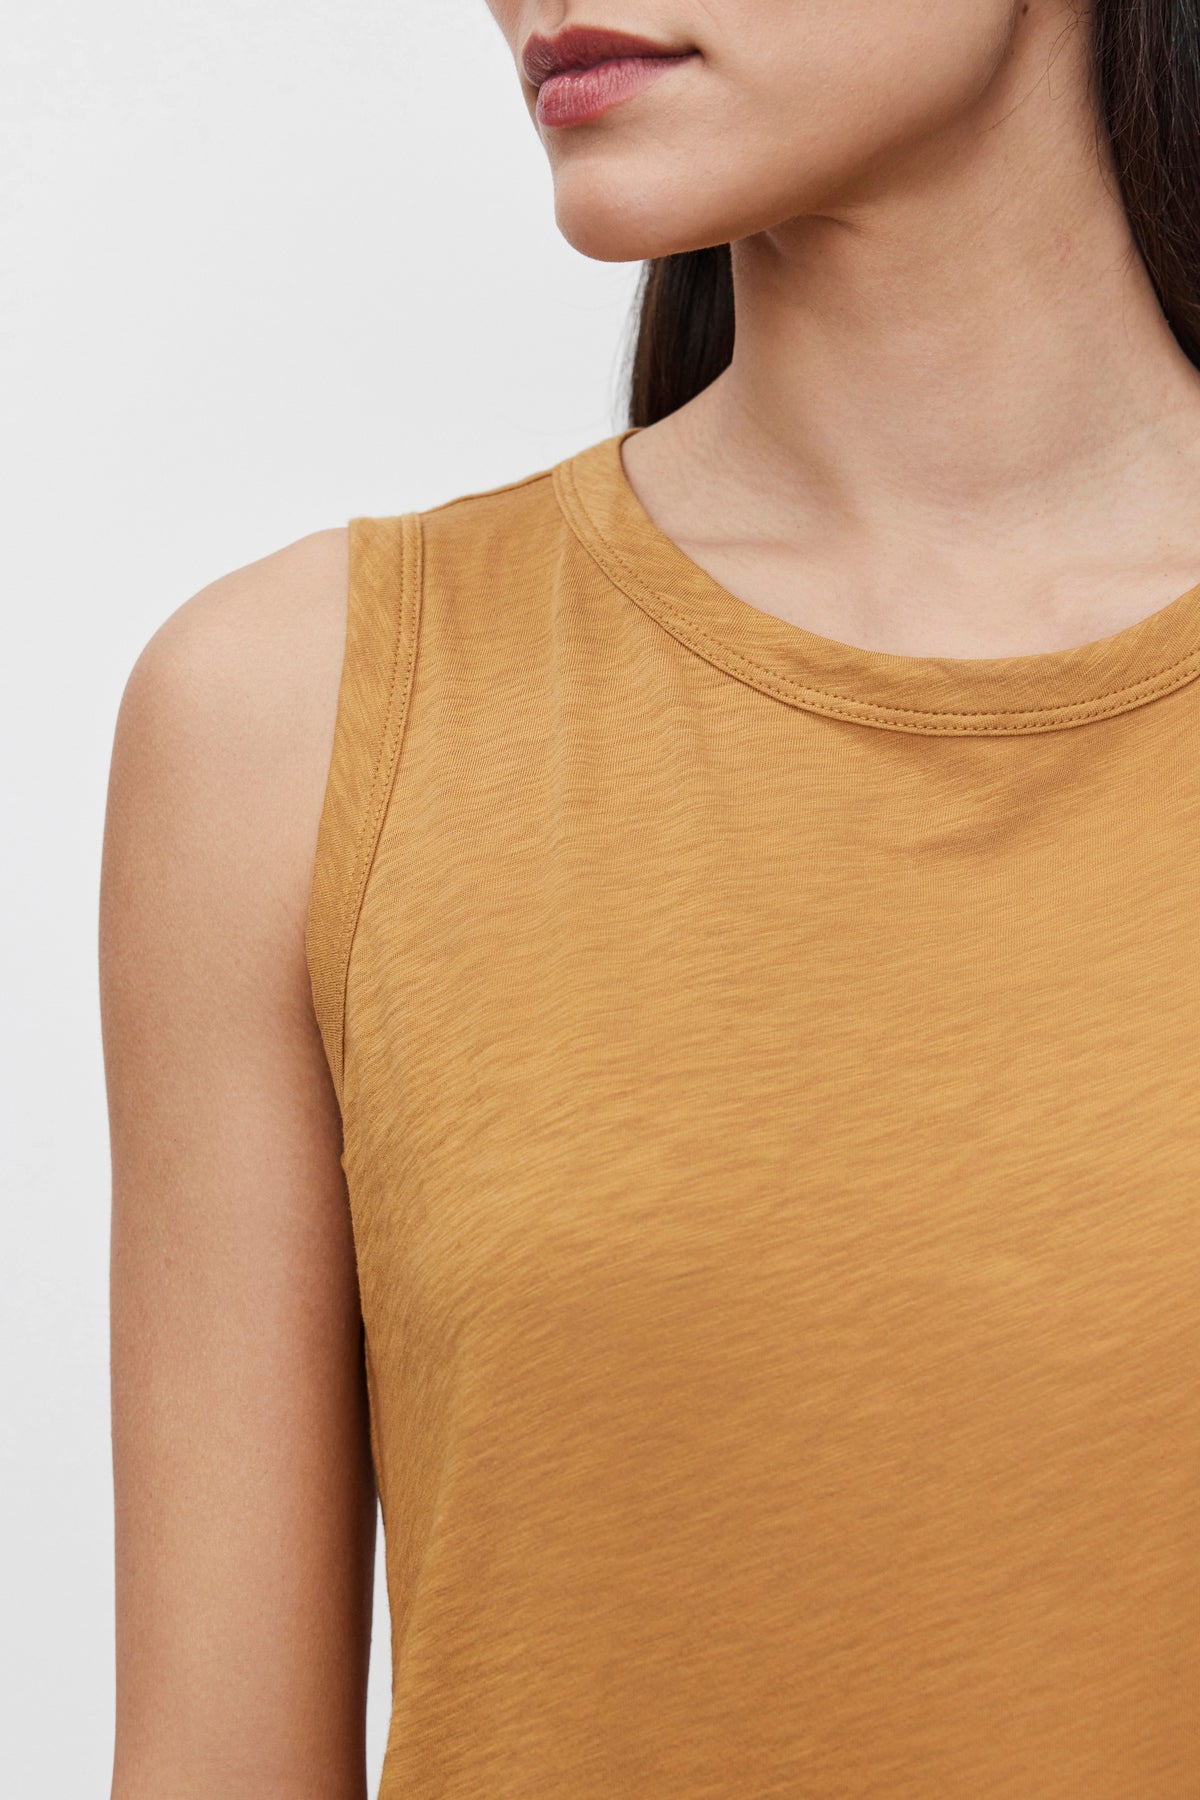 Close-up of a person wearing the TAURUS TANK TOP in mustard-yellow from Velvet by Graham & Spencer. The crew neck adds a touch of simplicity to this essential piece. The person has long dark hair, and their face is partially visible.-37629572776129